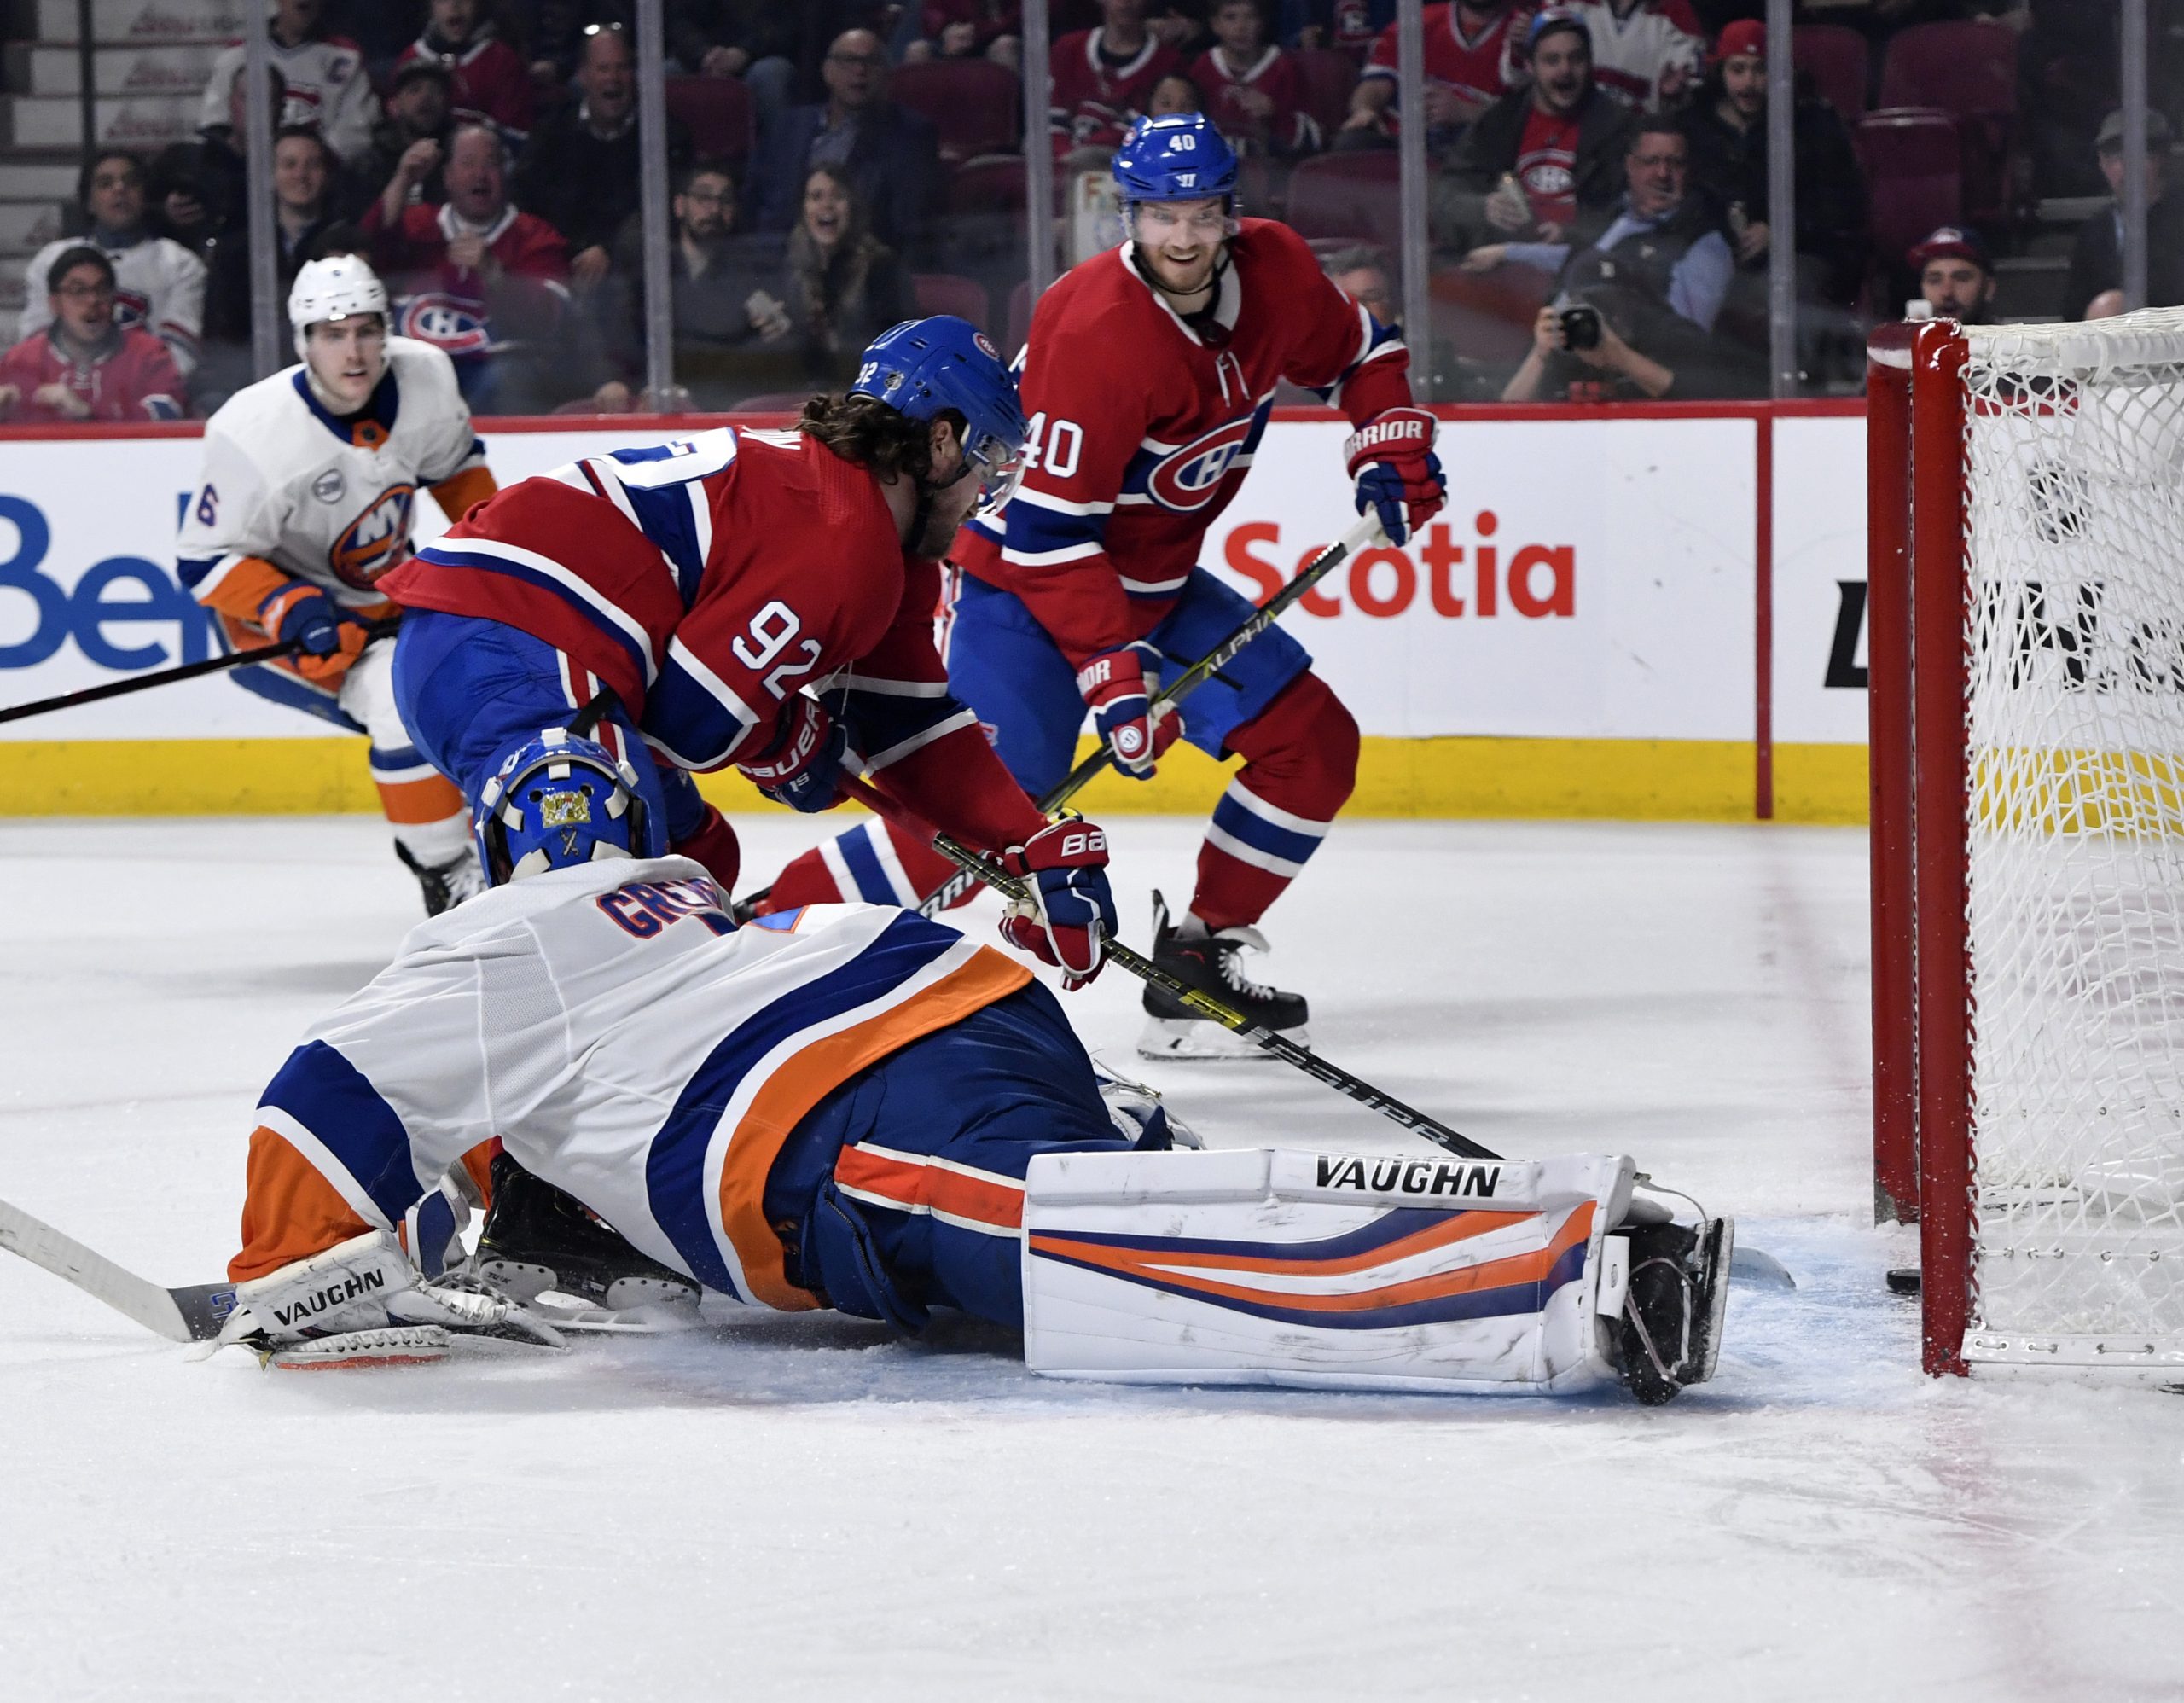 Mar 21, 2019; Montreal, Quebec, CAN; Montreal Canadiens forward Jonathan Drouin (92) scores a goal against New York Islanders goalie Thomas Greiss (1) during the second period at the Bell Centre. Mandatory Credit: Eric Bolte-USA TODAY Sports